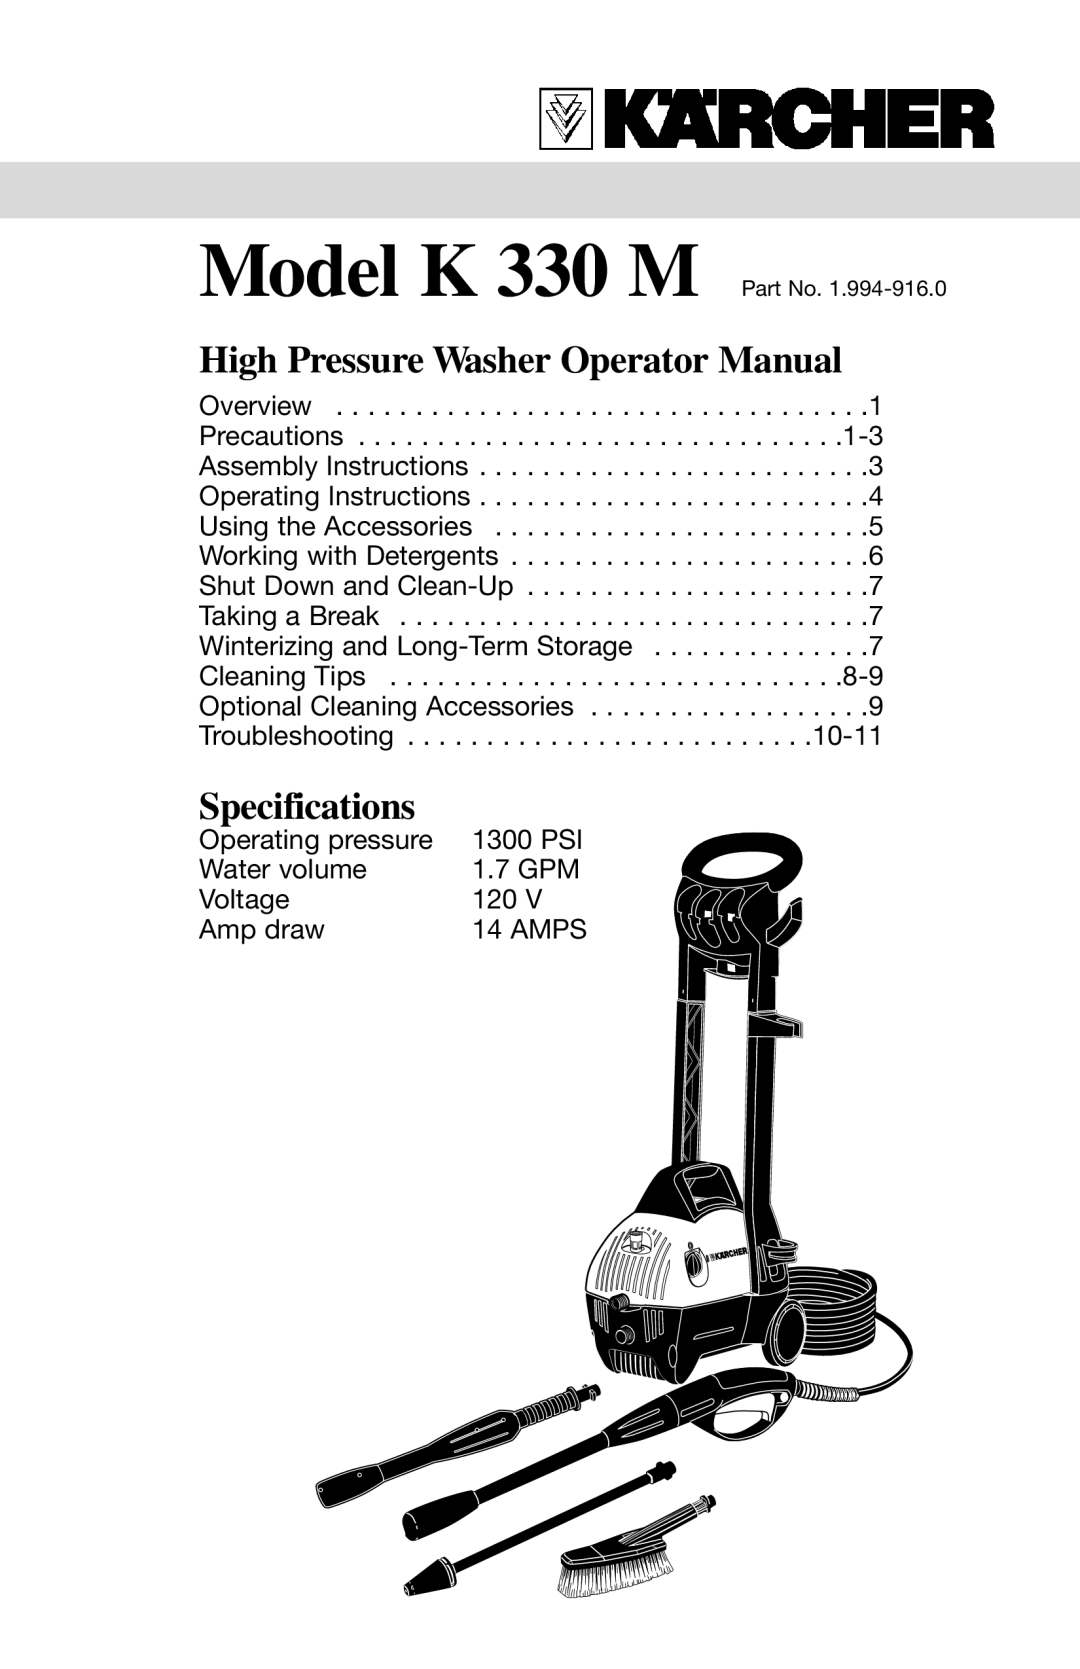 Karcher K330M specifications High Pressure Washer Operator Manual, Specifications 